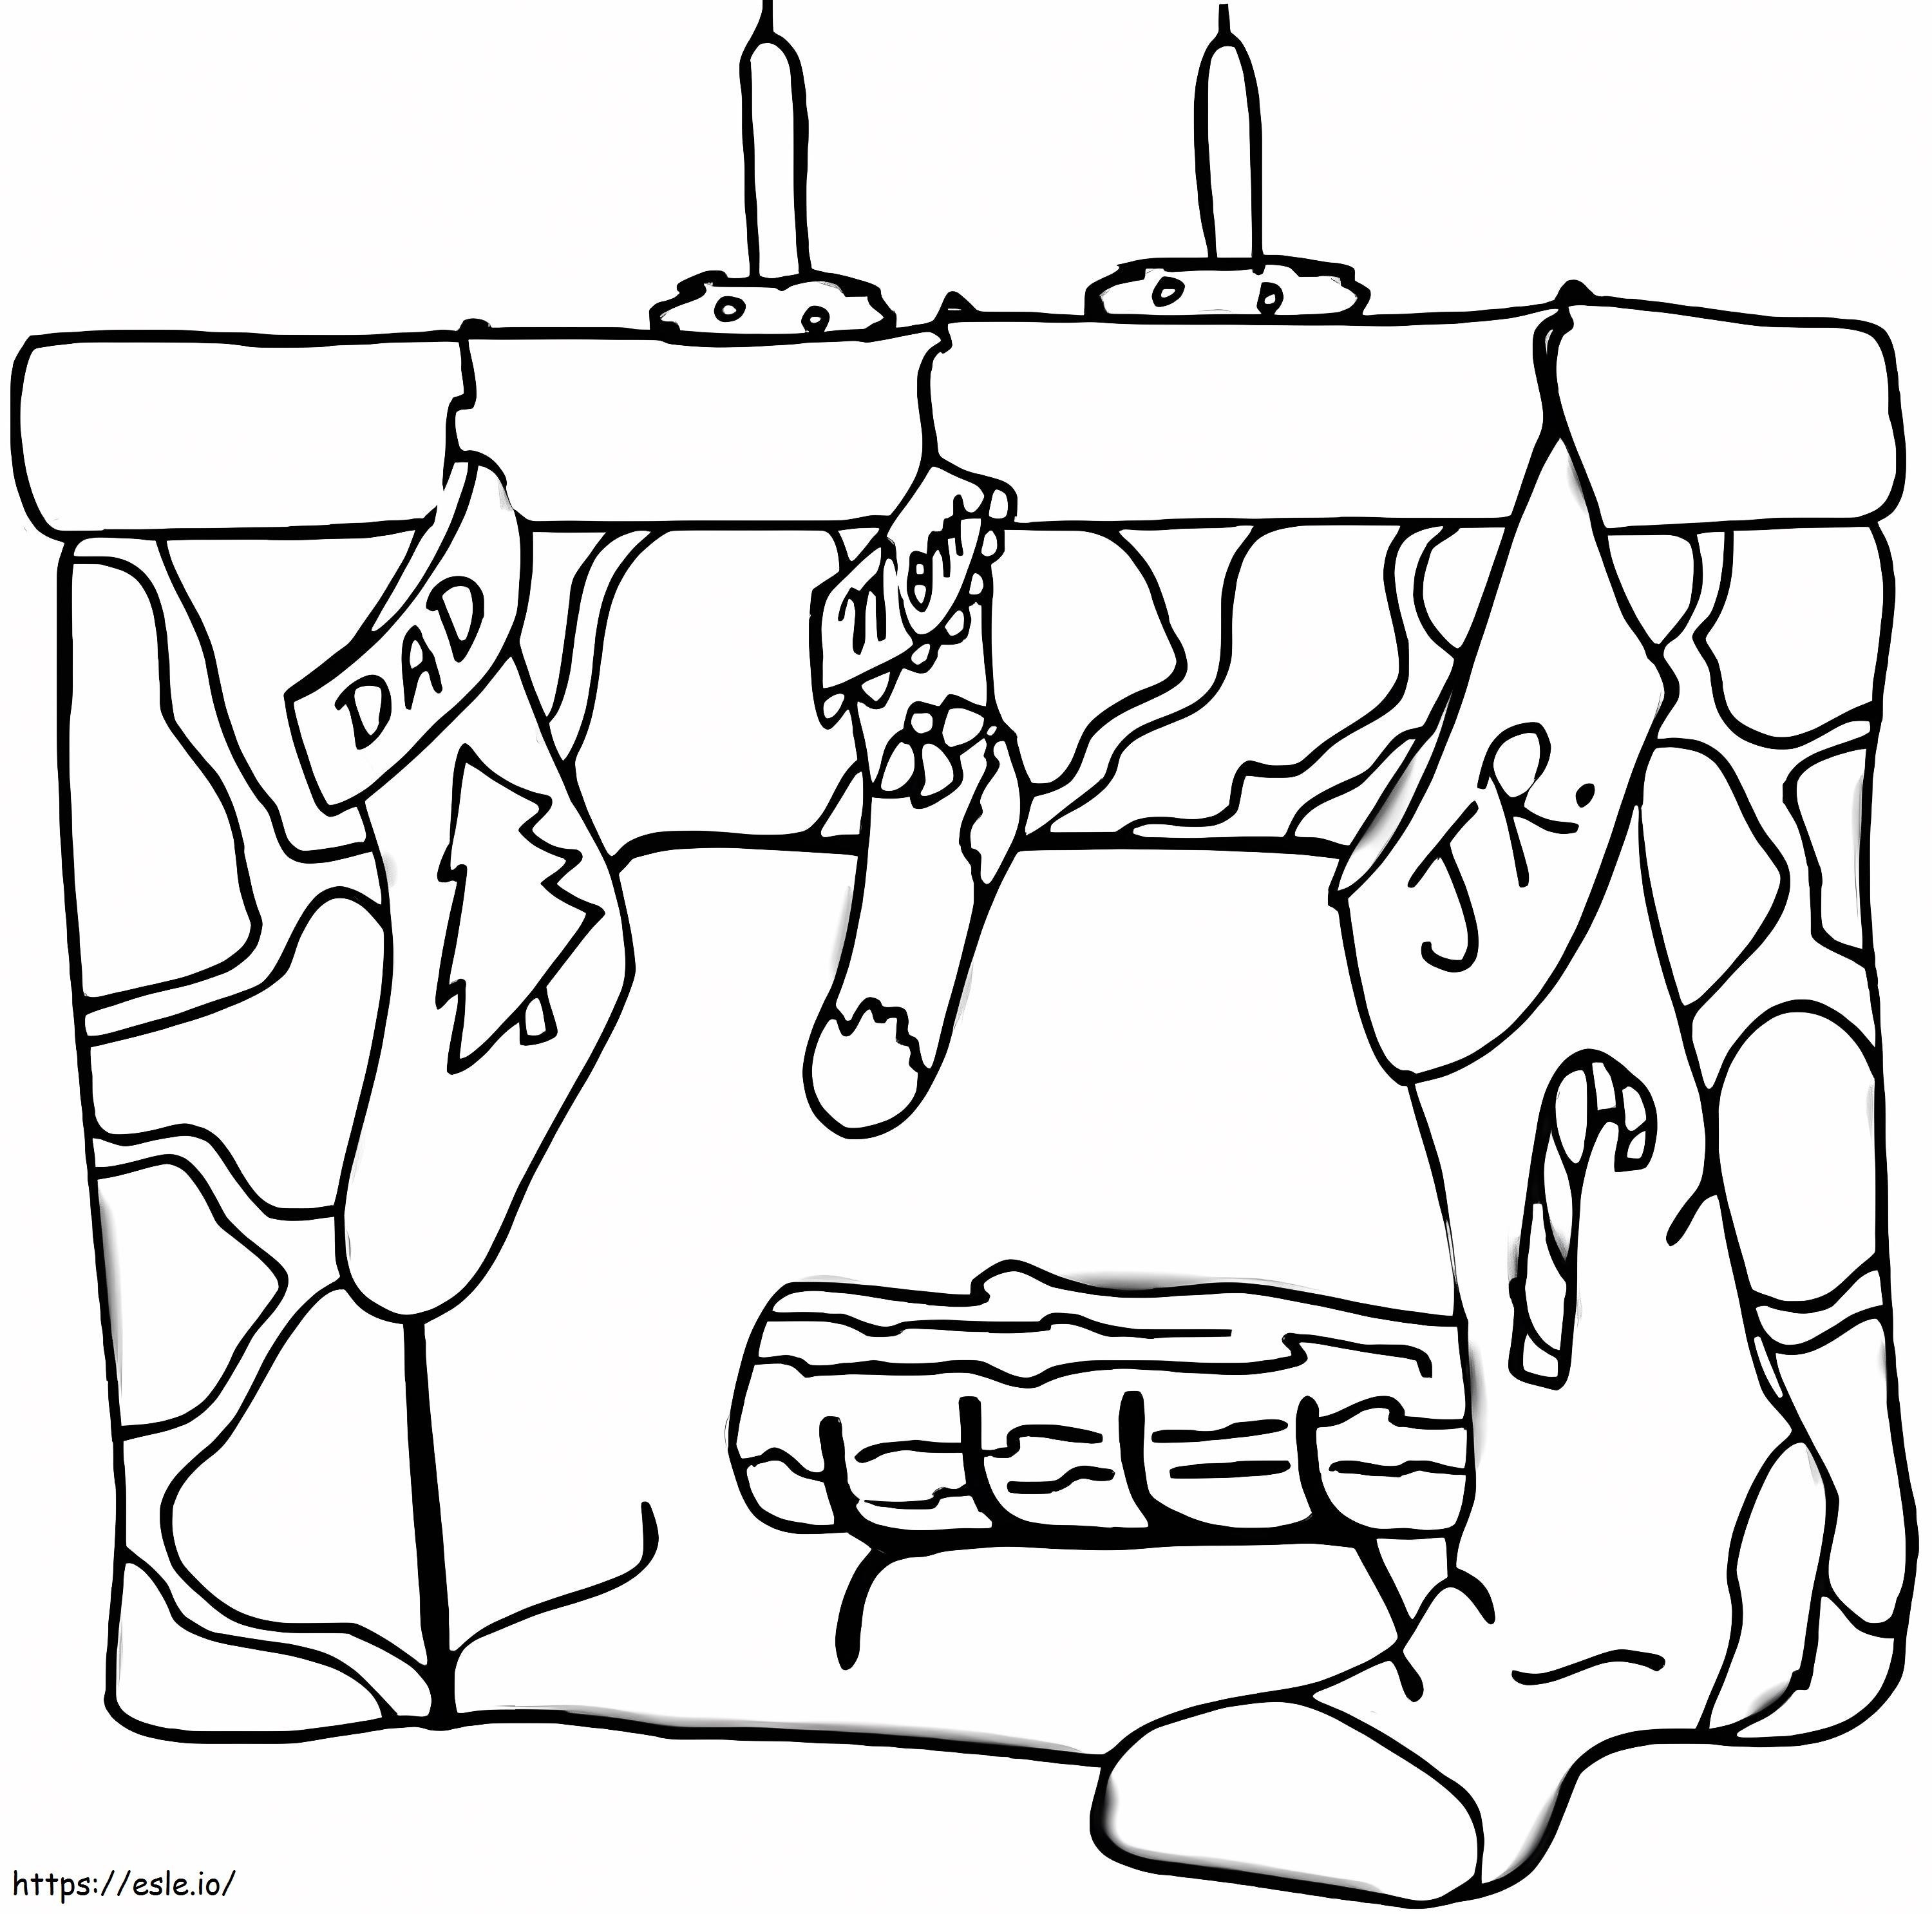 Presents At Christmas Fireplace coloring page